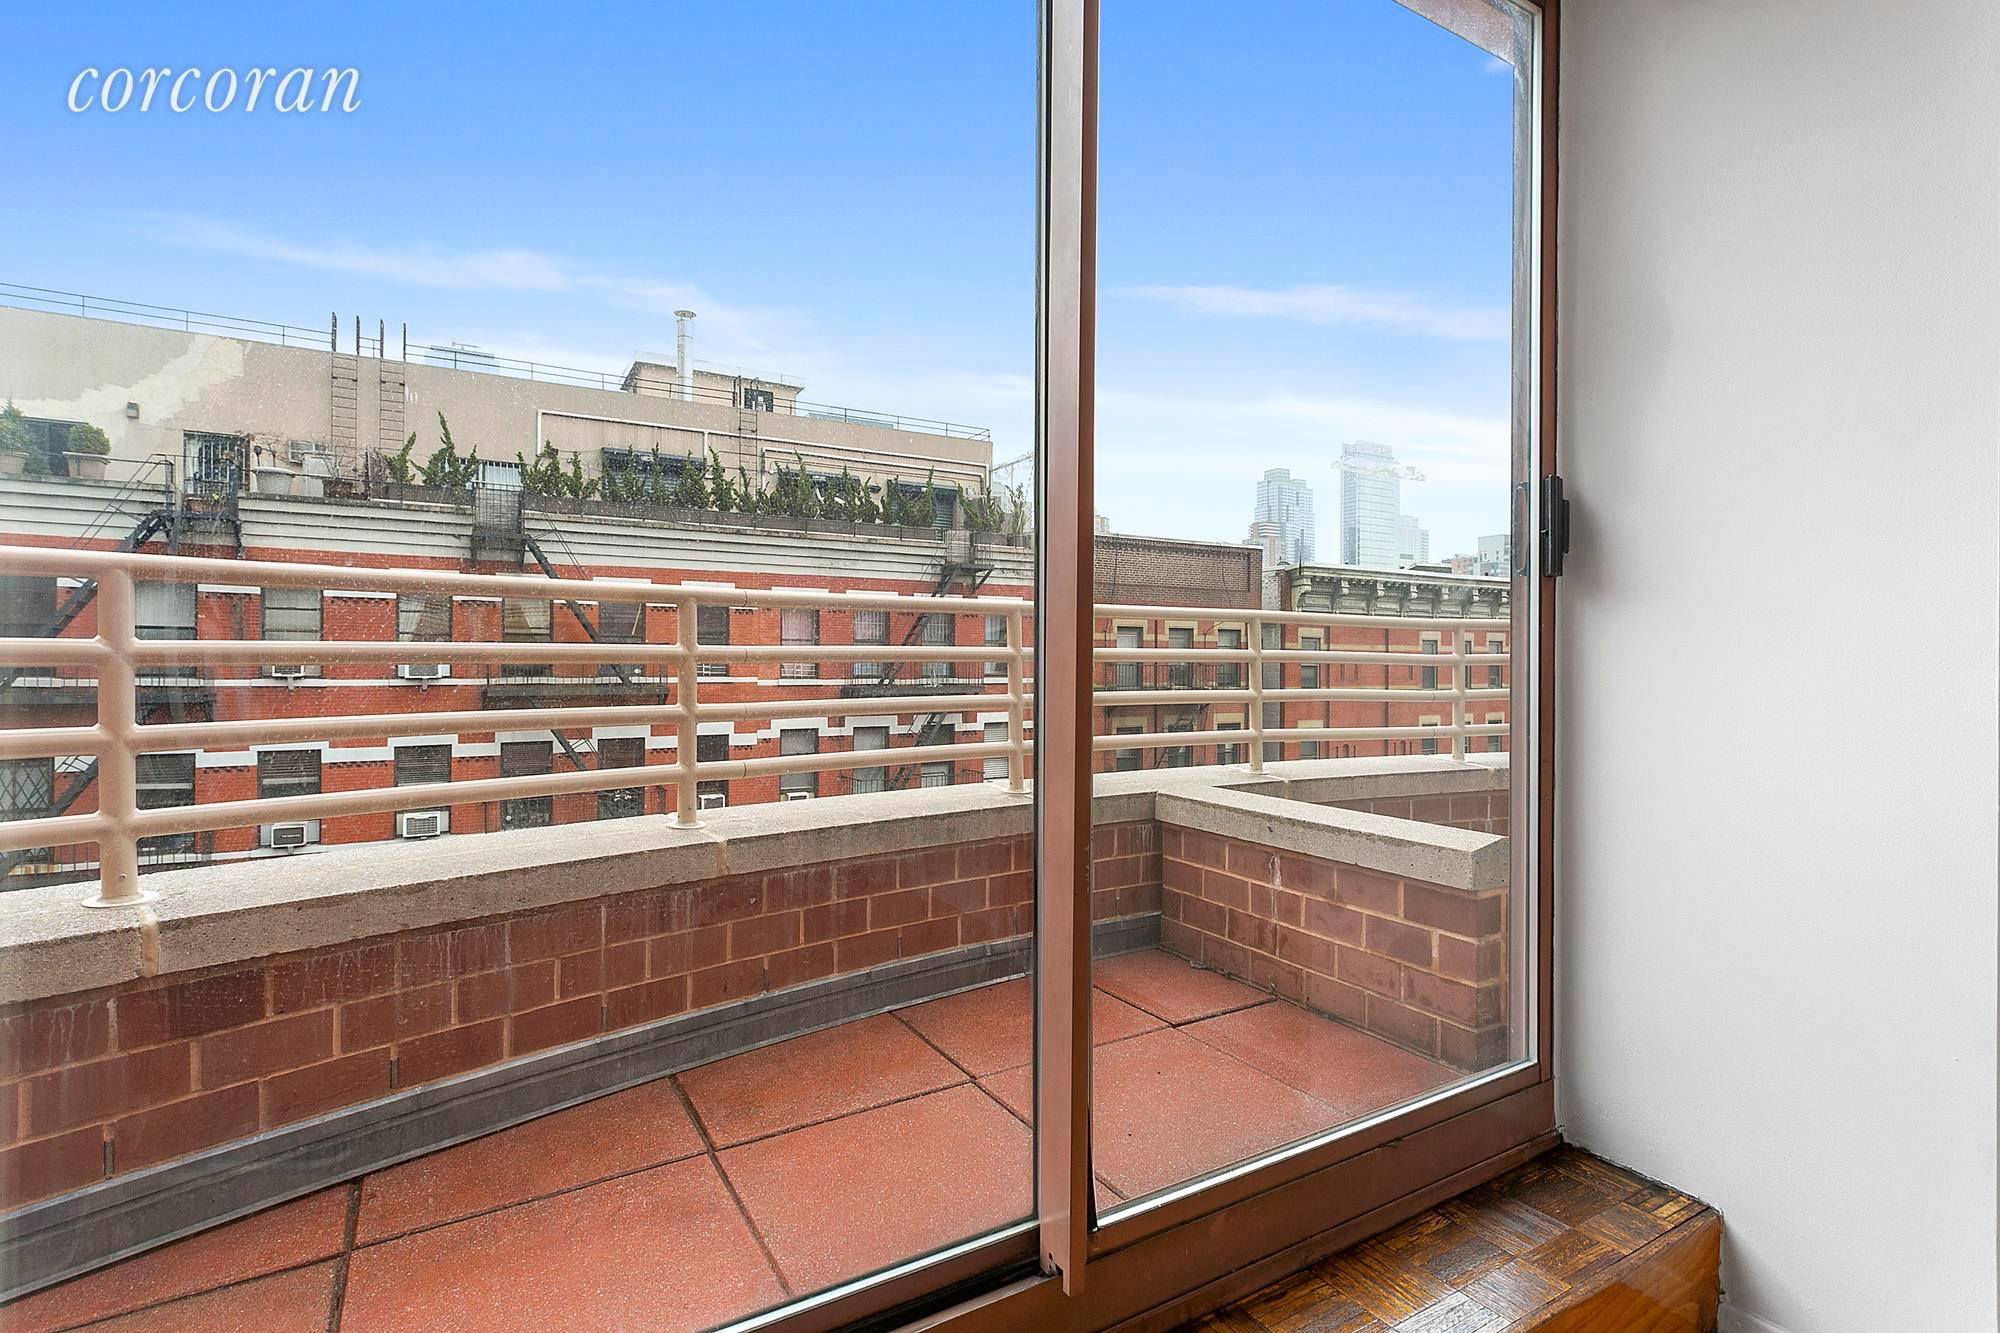 Residence 5A is a large, bright and sunny converted one bedroom with a terrace.